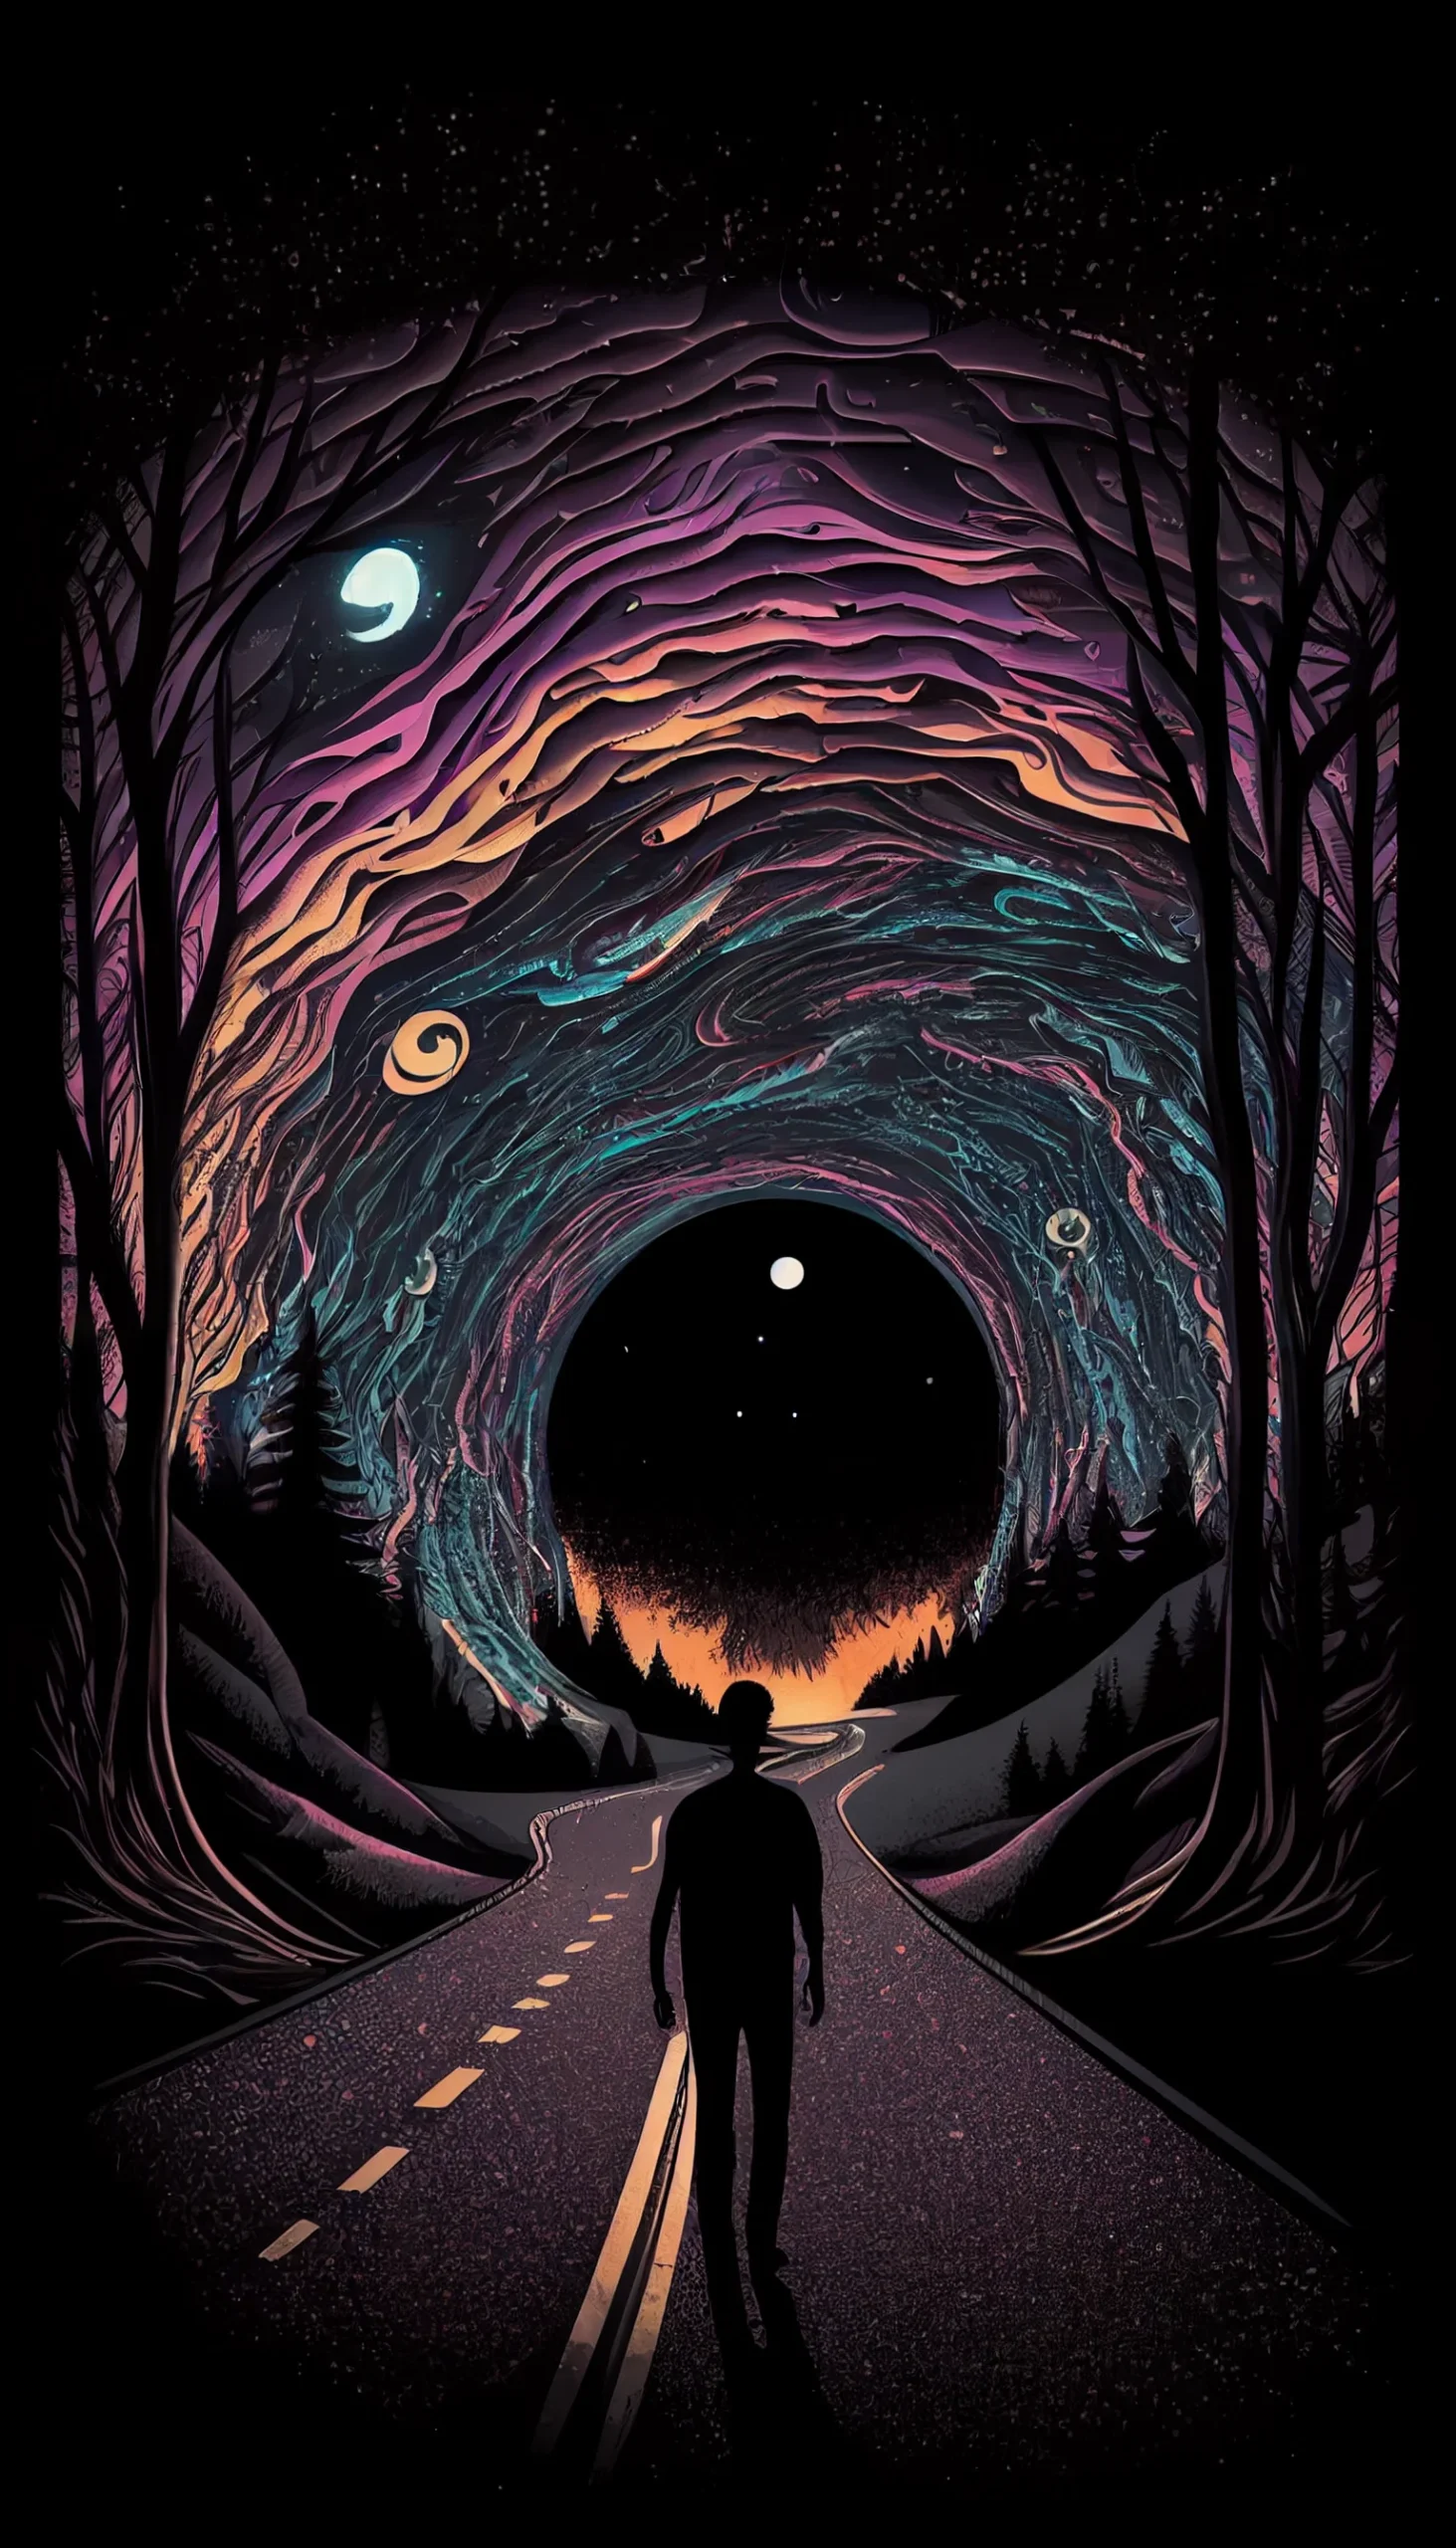 IPhone wallpaper of a man walking down a road at night with a black hole at the end - Psychedelic